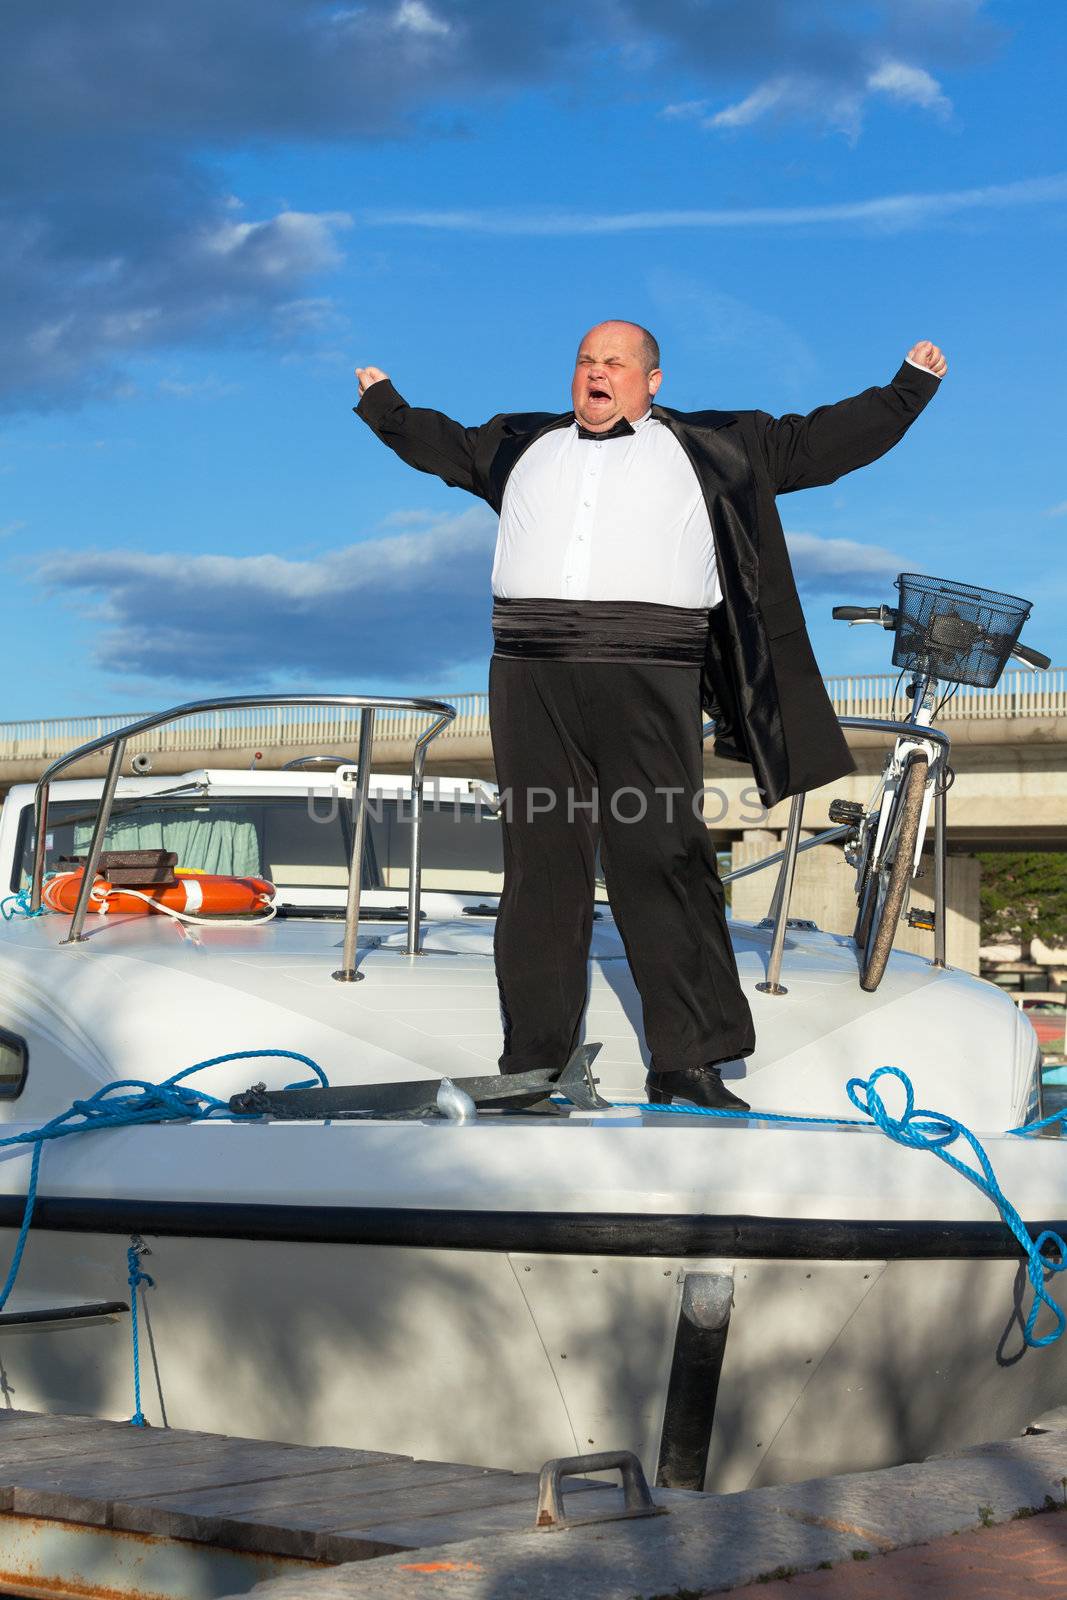 Overweight man in tuxedo standing on the deck of a luxury pleasure boat